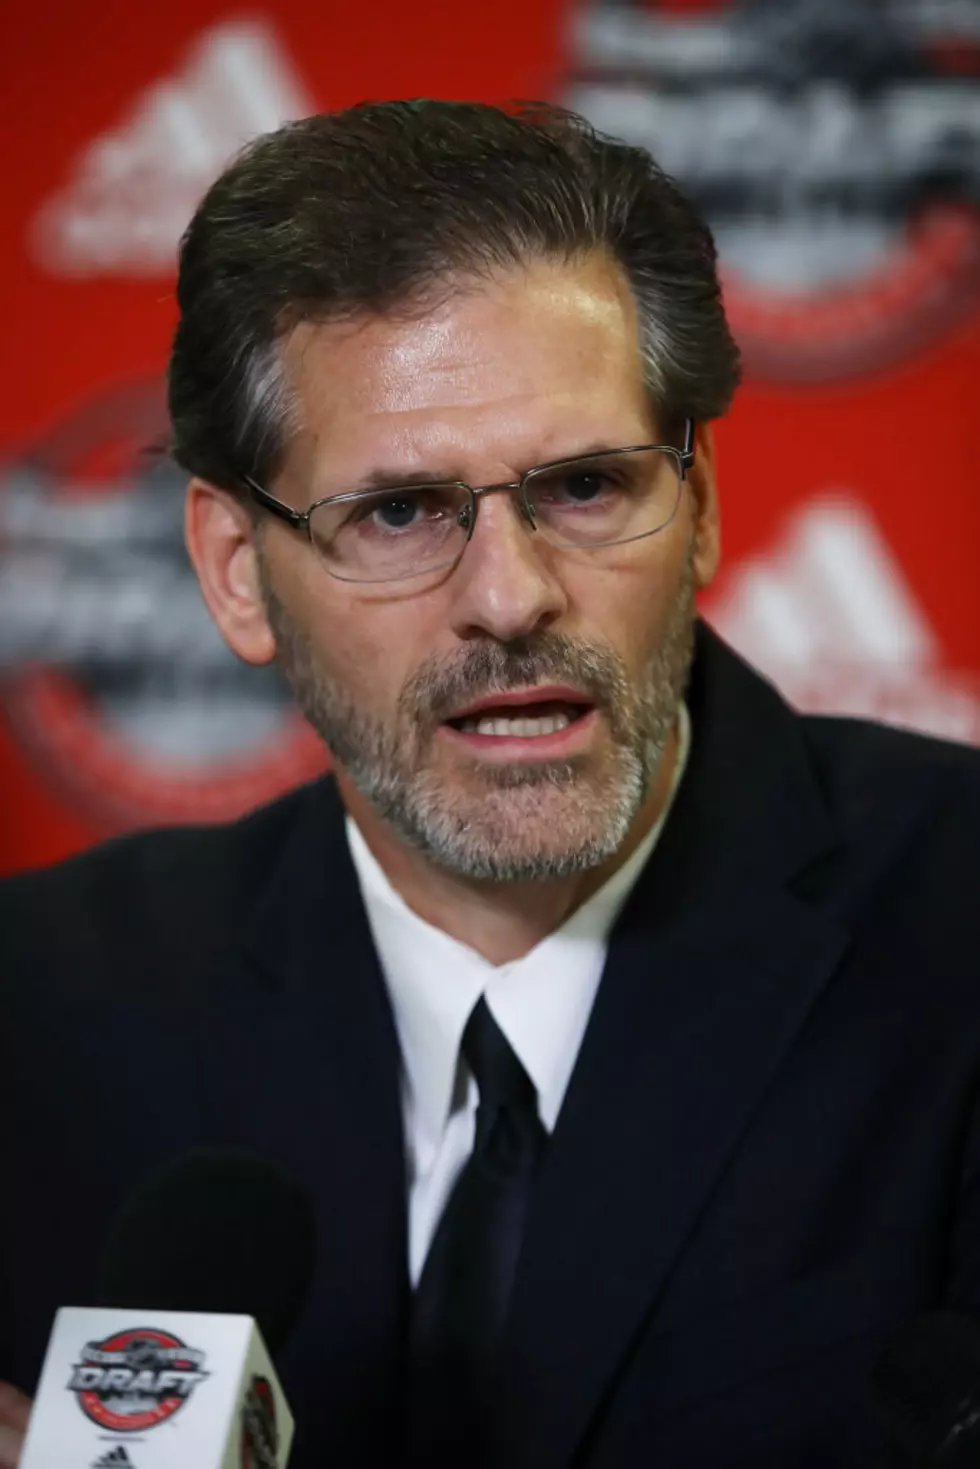 Flyers React to ‘Shocking’ News of Hextall’s Dismissal